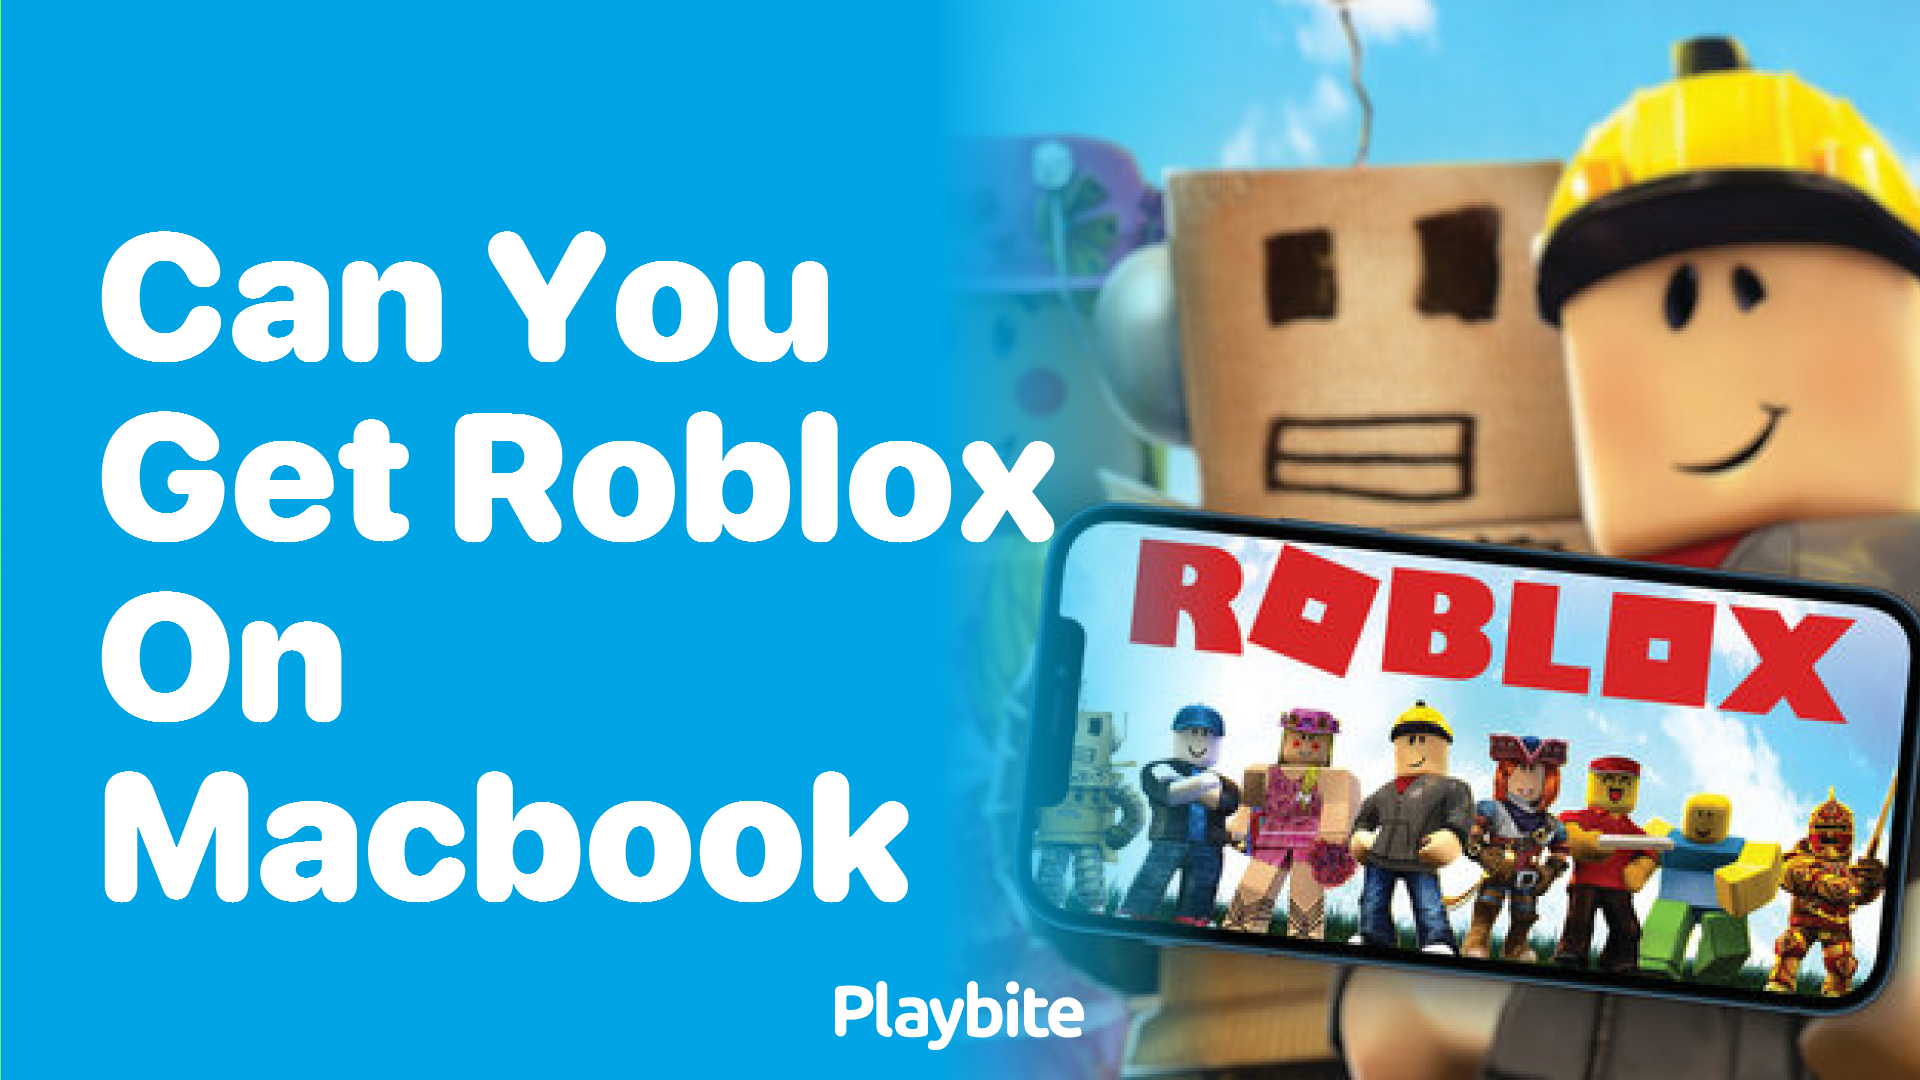 Can You Get Roblox on MacBook?